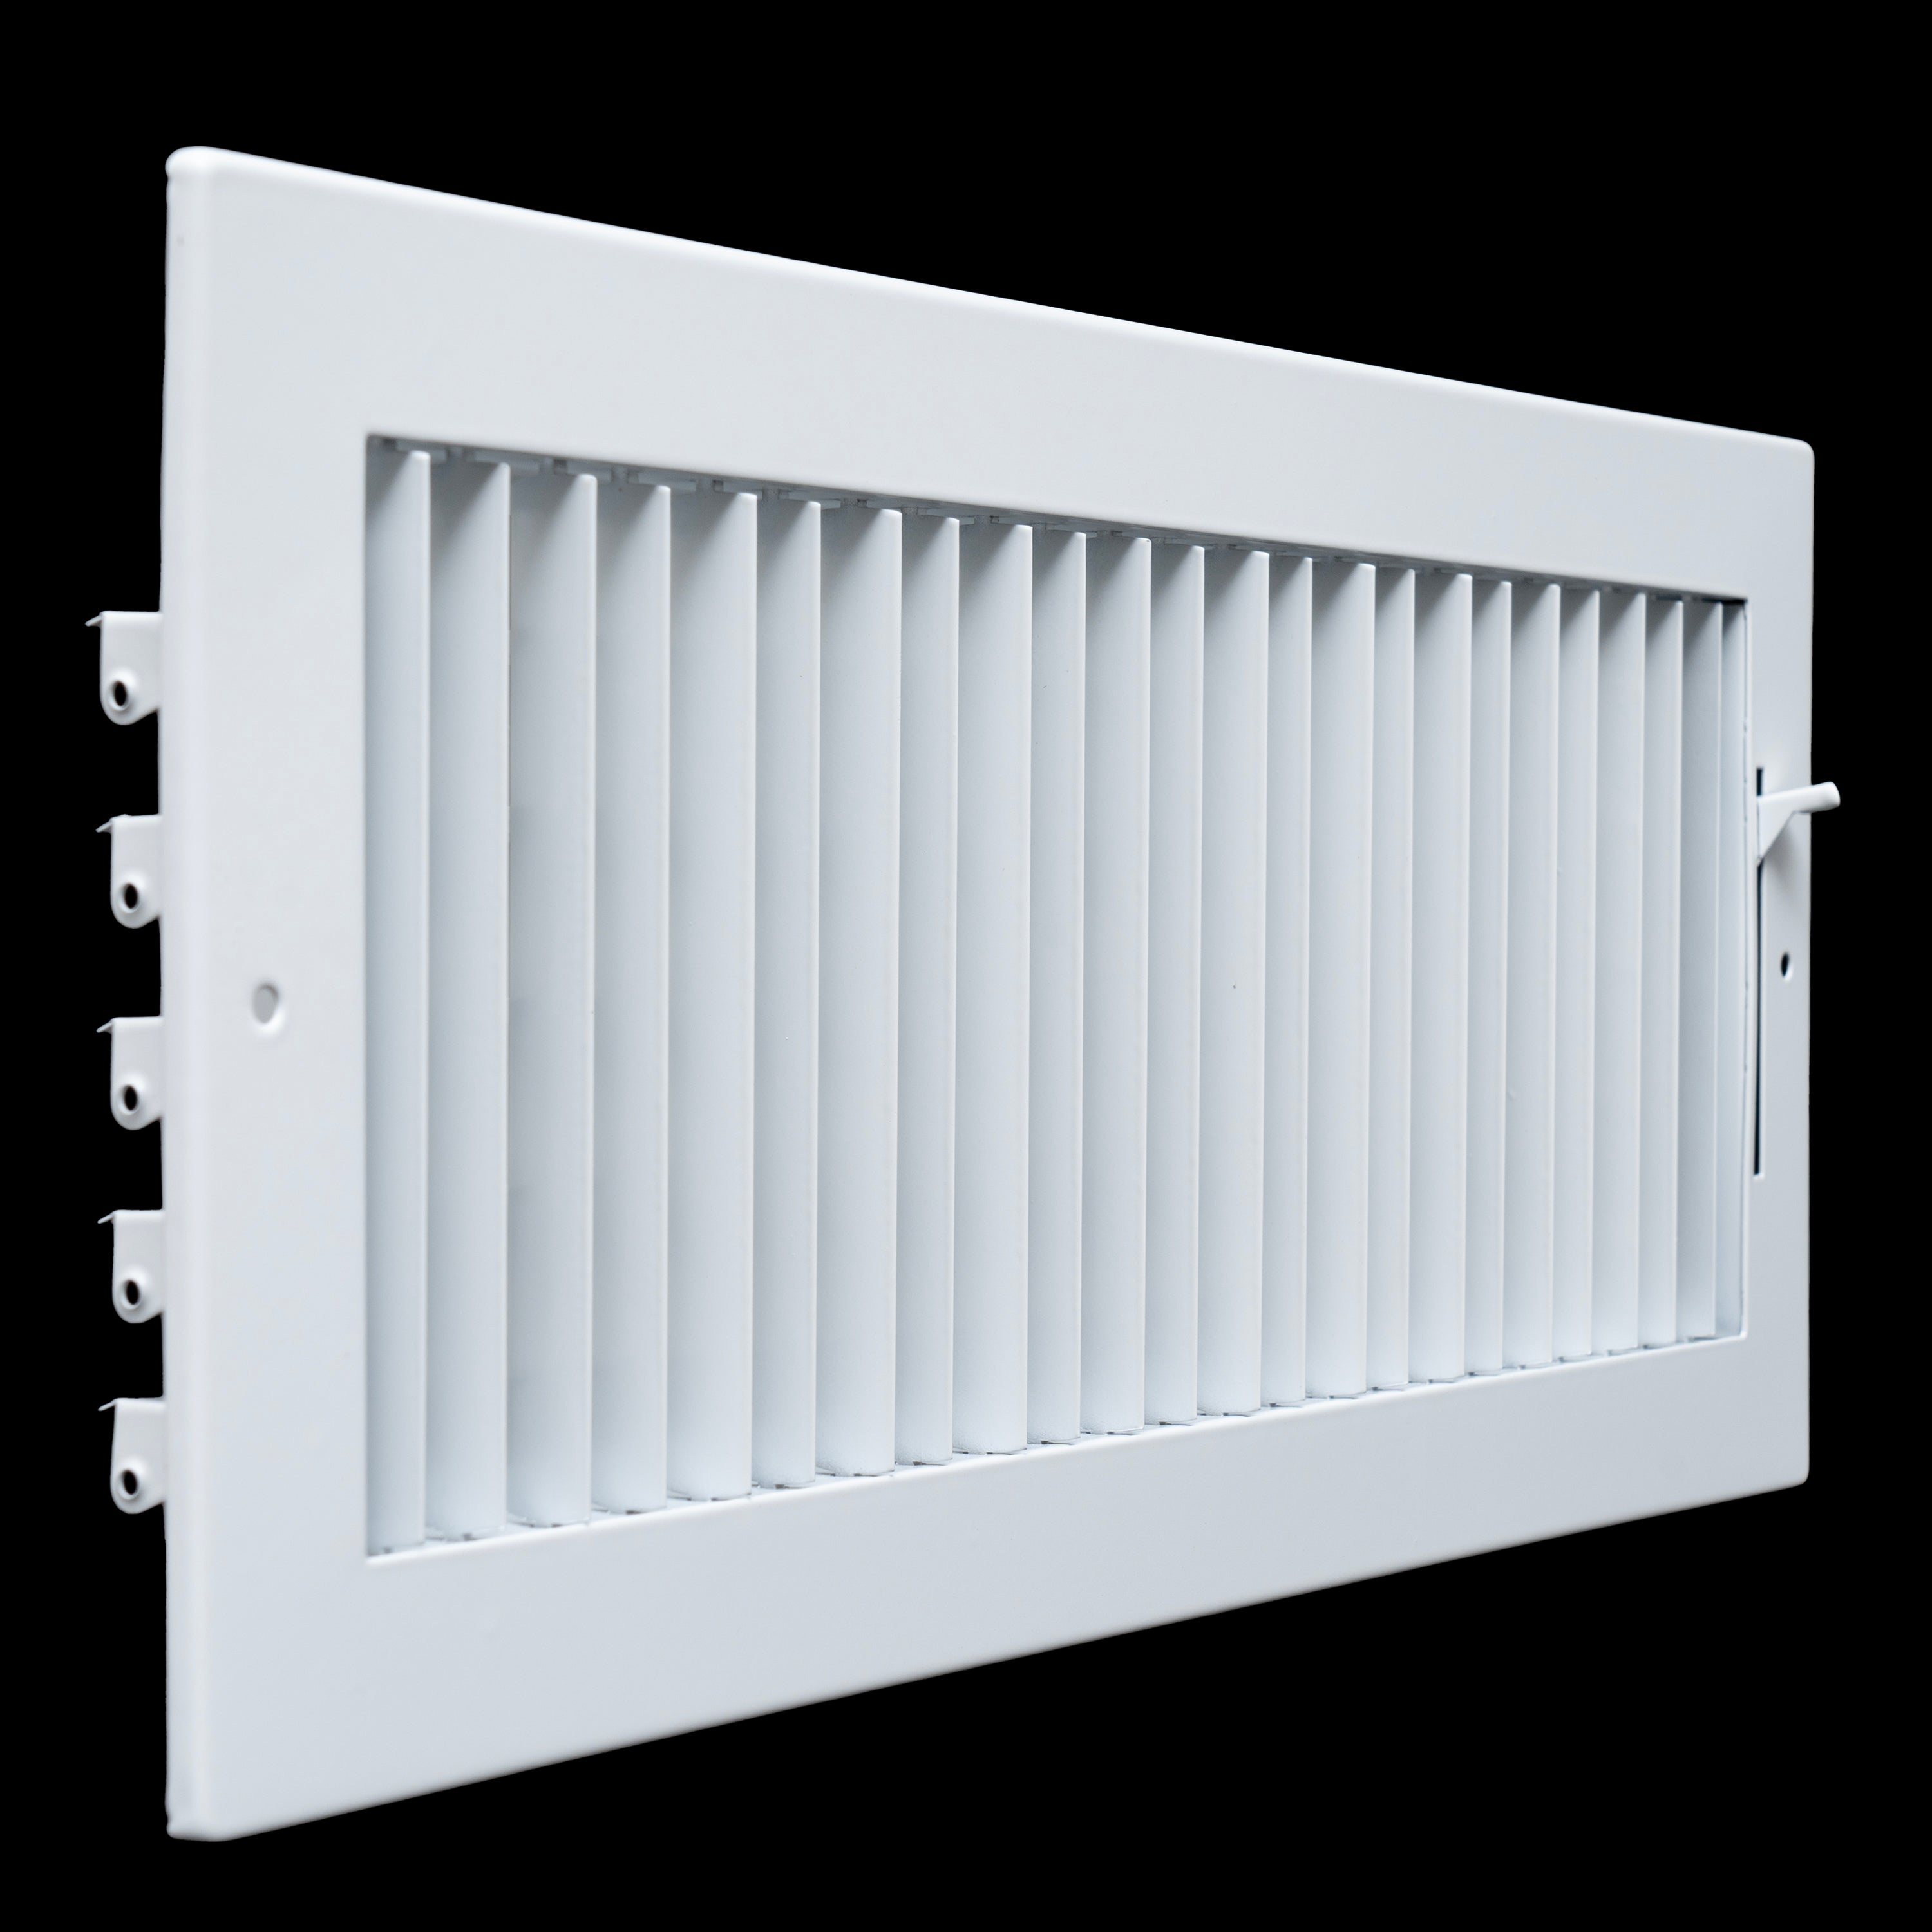 16"W x 6"H  Steel Adjustable Air Supply Grille | Register Vent Cover Grill for Sidewall and Ceiling | White | Outer Dimensions: 17.75"W X 7.75"H for 16x6 Duct Opening